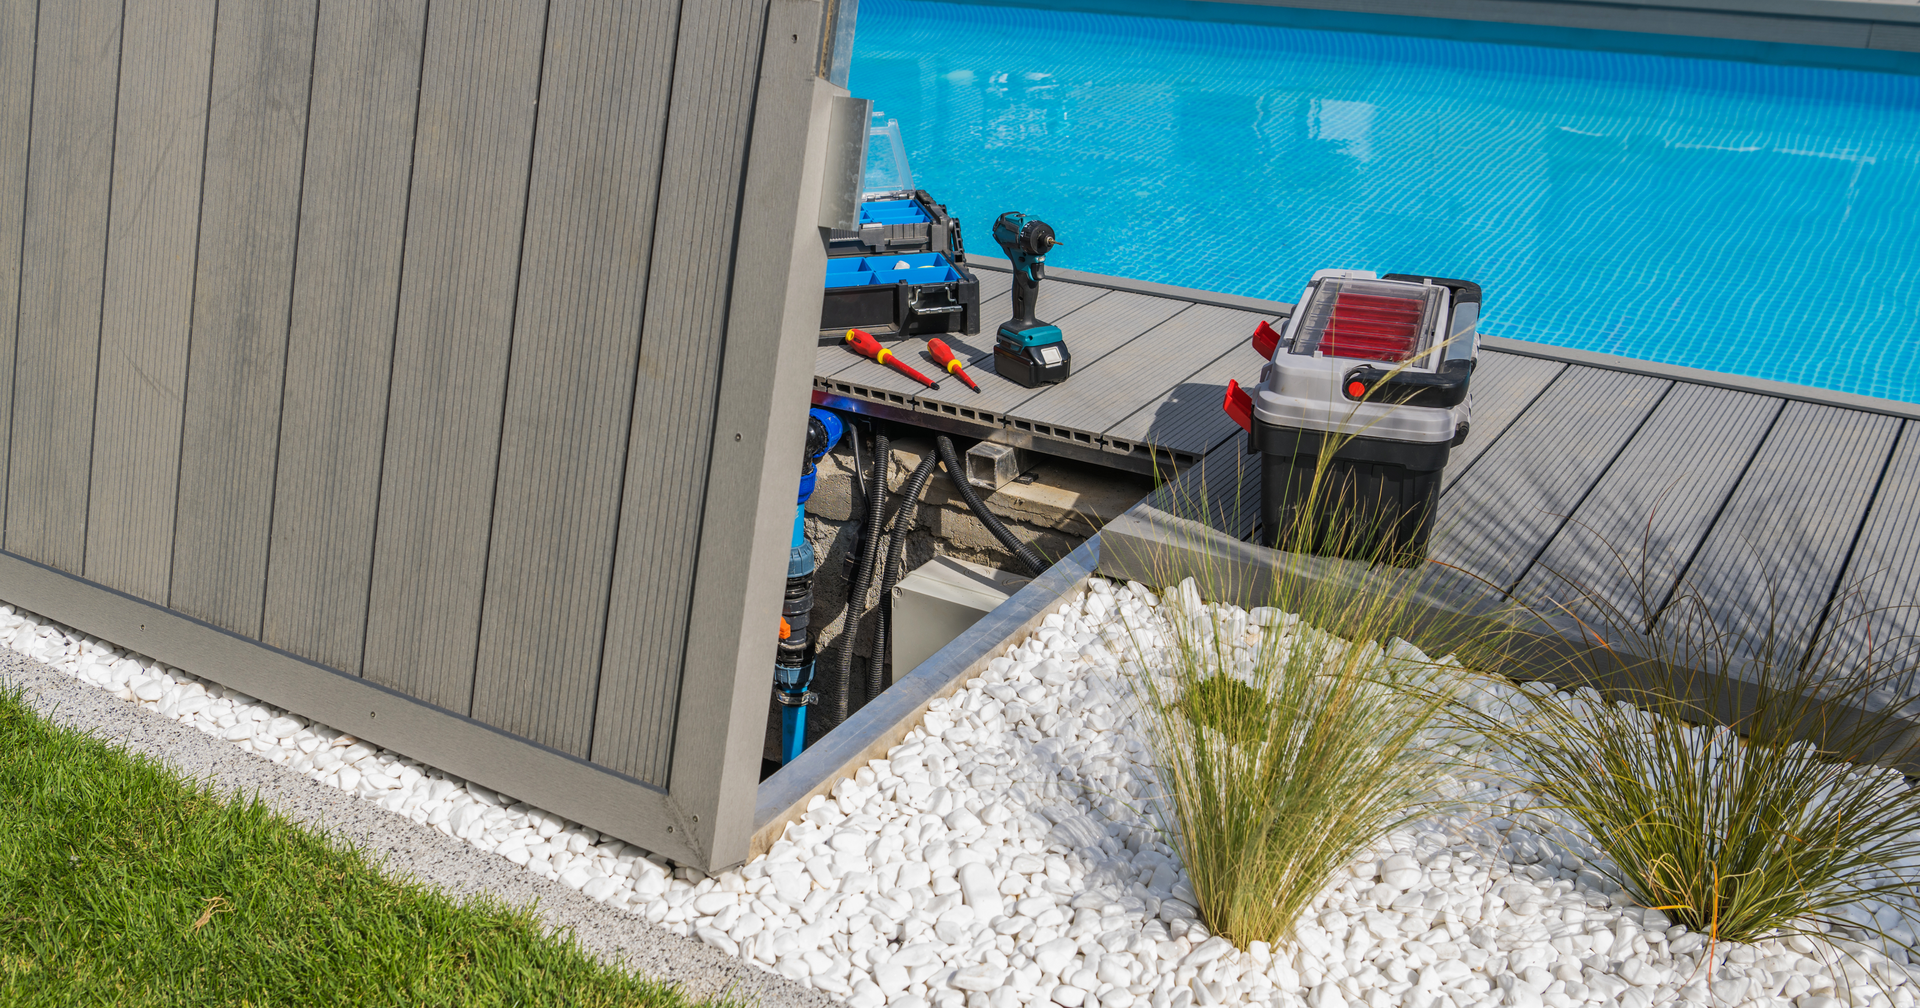 Turning Pool Problems into Pool Solutions